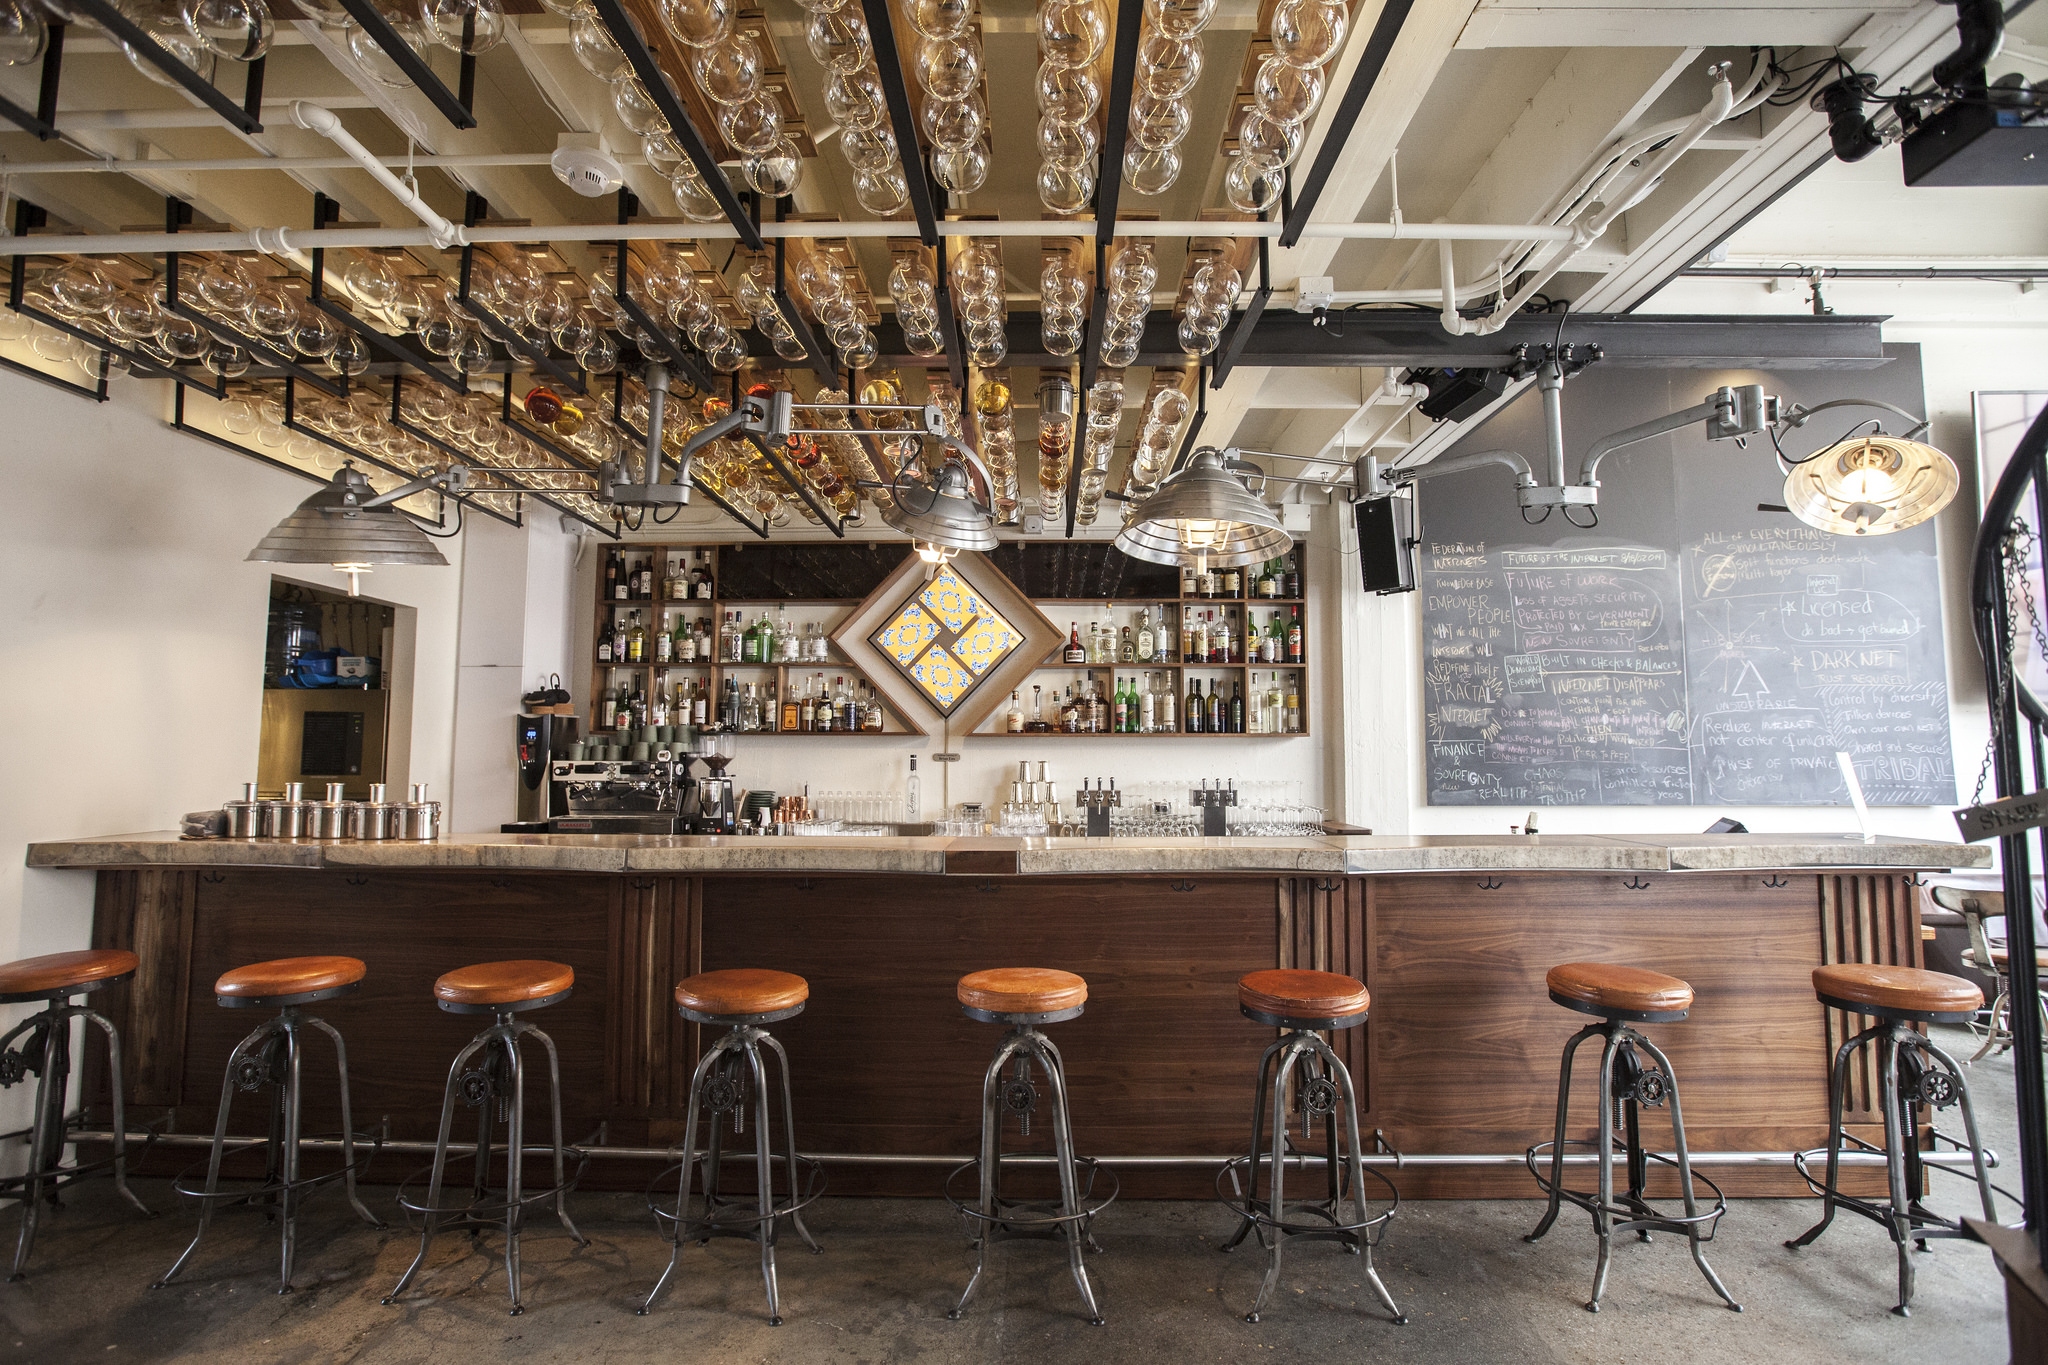  Directly above the bar hangs an intricately designed ceiling storage unit for The Interval’s bottle club program. We designed and fabricated the ceiling mounted bottle holders, which in the night become illuminated from above, casting a twinkling, g